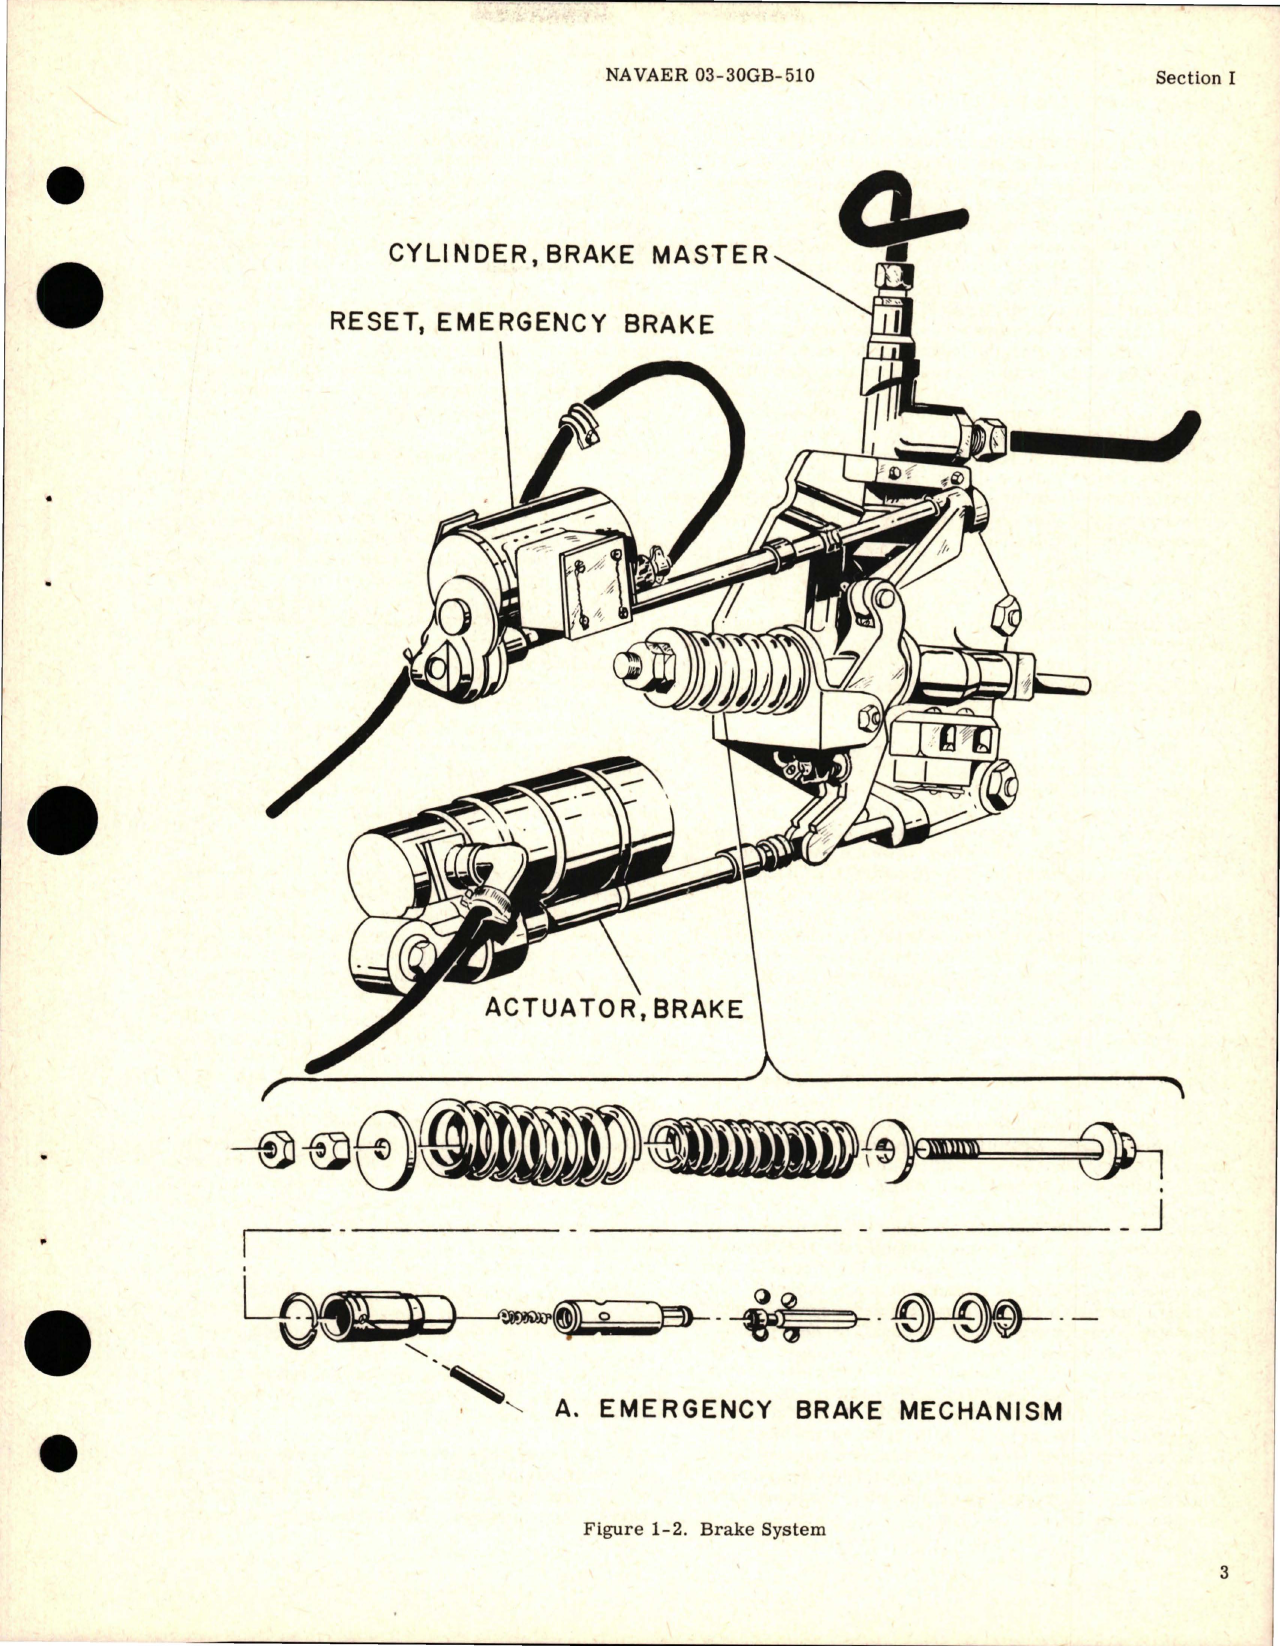 Sample page 9 from AirCorps Library document: Operation and Maintenance Instructions for Automatic Hose Reel Assembly - Models A-12C, A-12A-2, and A-12C-1